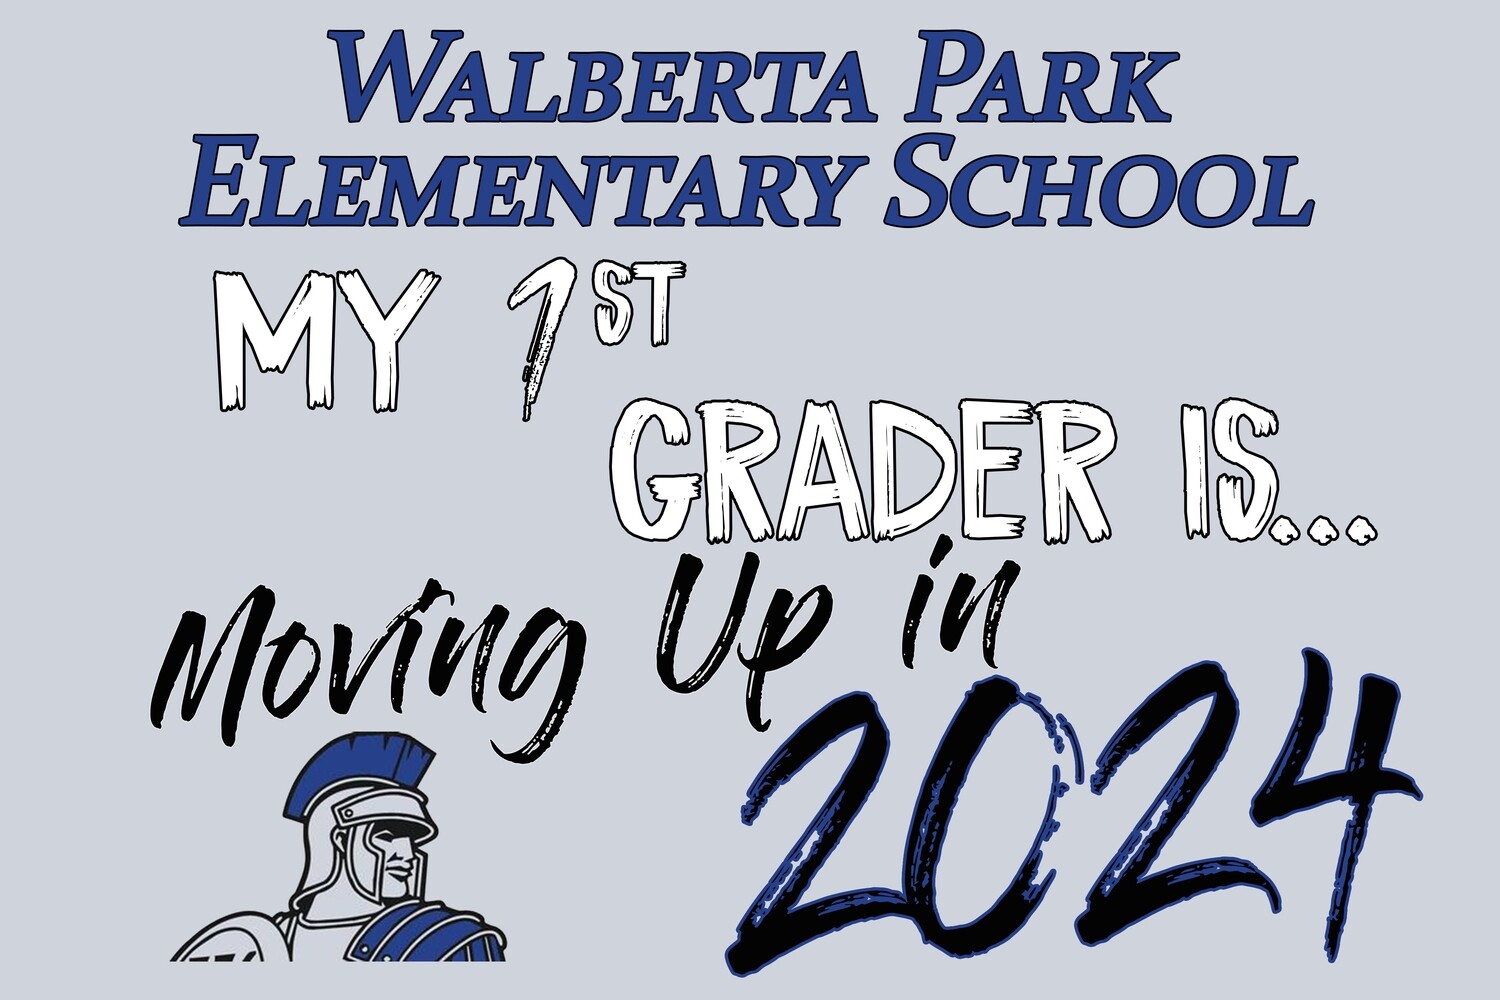 Walberta Park Elementary &quot;Moving Up&quot; Lawn Sign